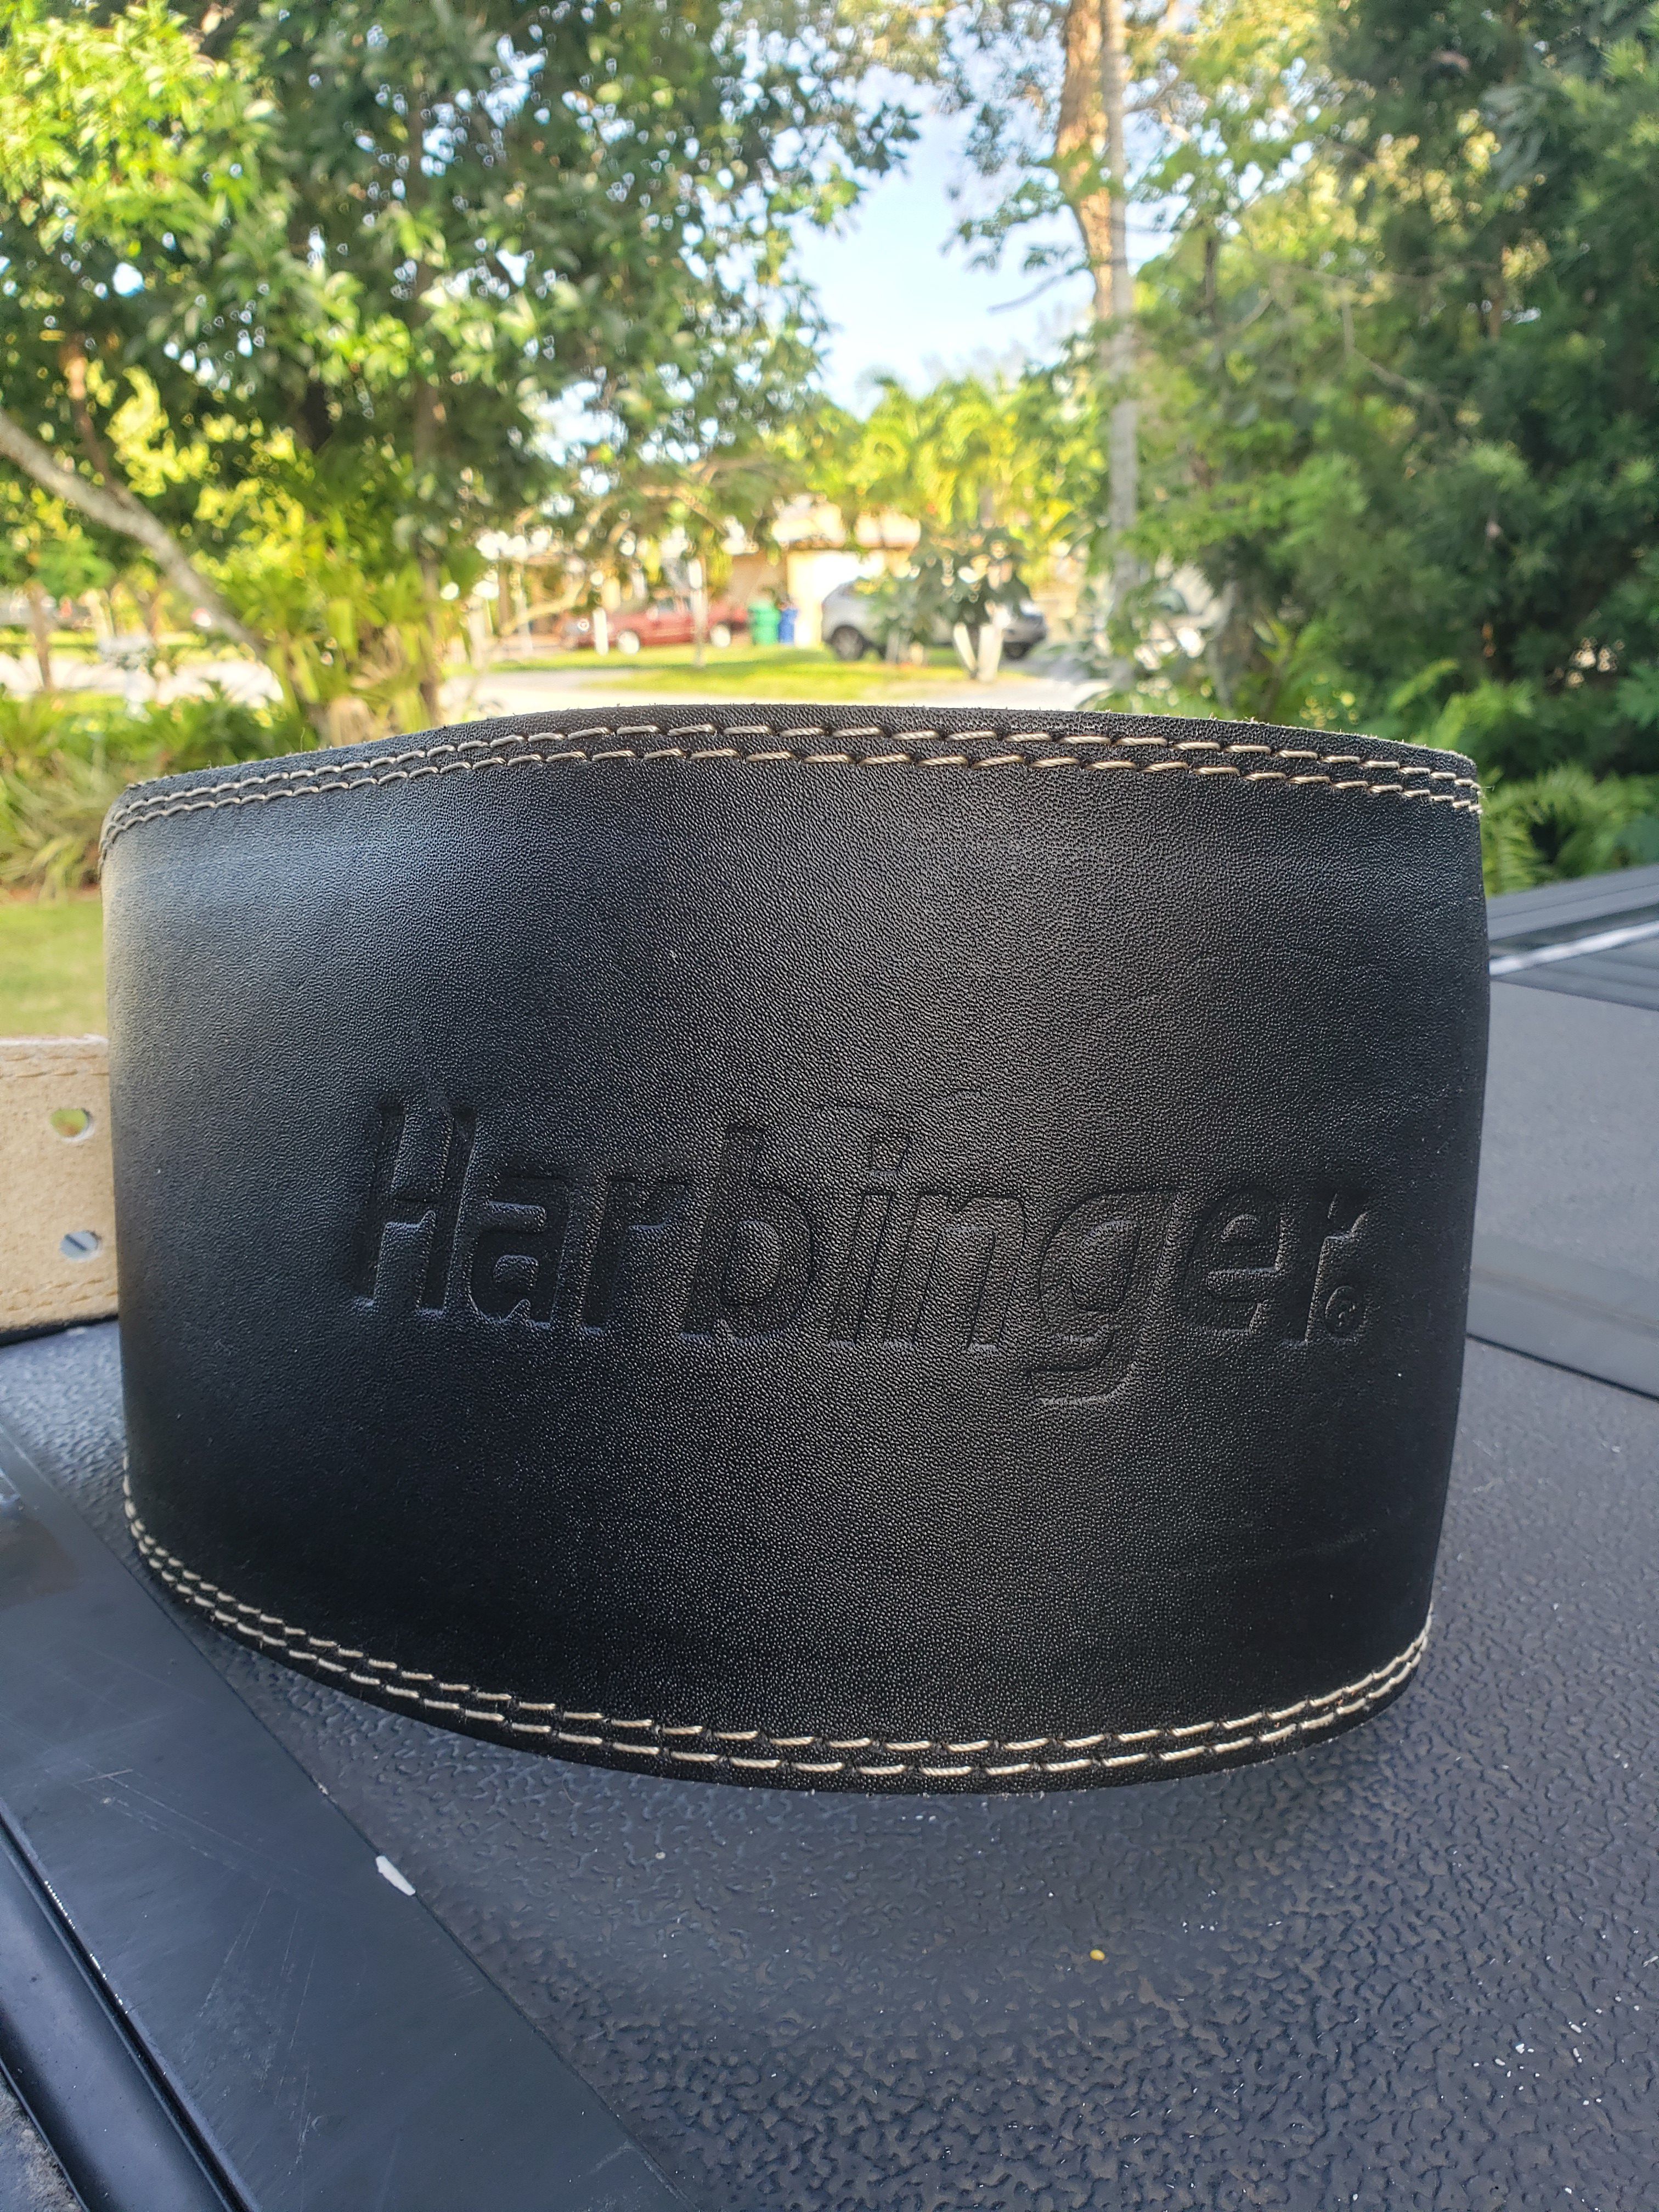 **BRAND NEW WITH TAGS**Harbinger Padded Leather Contoured Weightlifting Belt with Suede Lining and Steel Roller Buckle